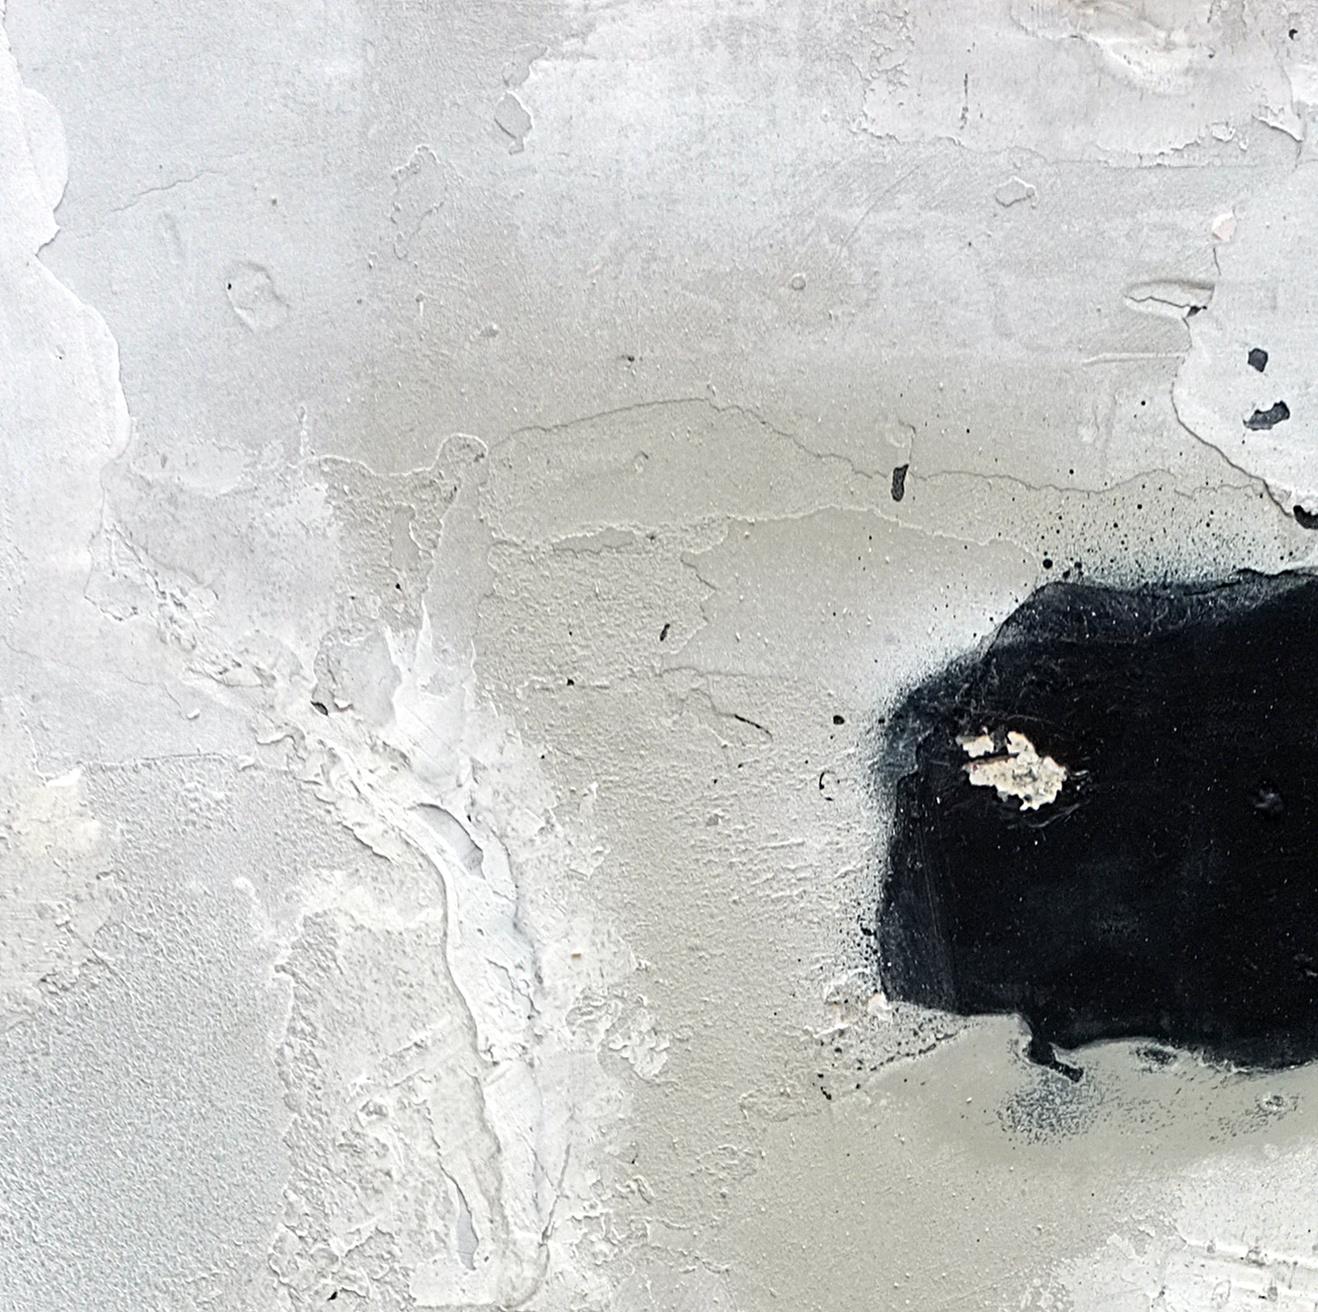 'Gum' is a minimalist abstract mixed media painting by French artist - Antoine Puisais. It is a small gray, black and white contemporary collage on linen canvas with a neutral design and authentic, raw aesthetic. Its beautiful monochromatic style